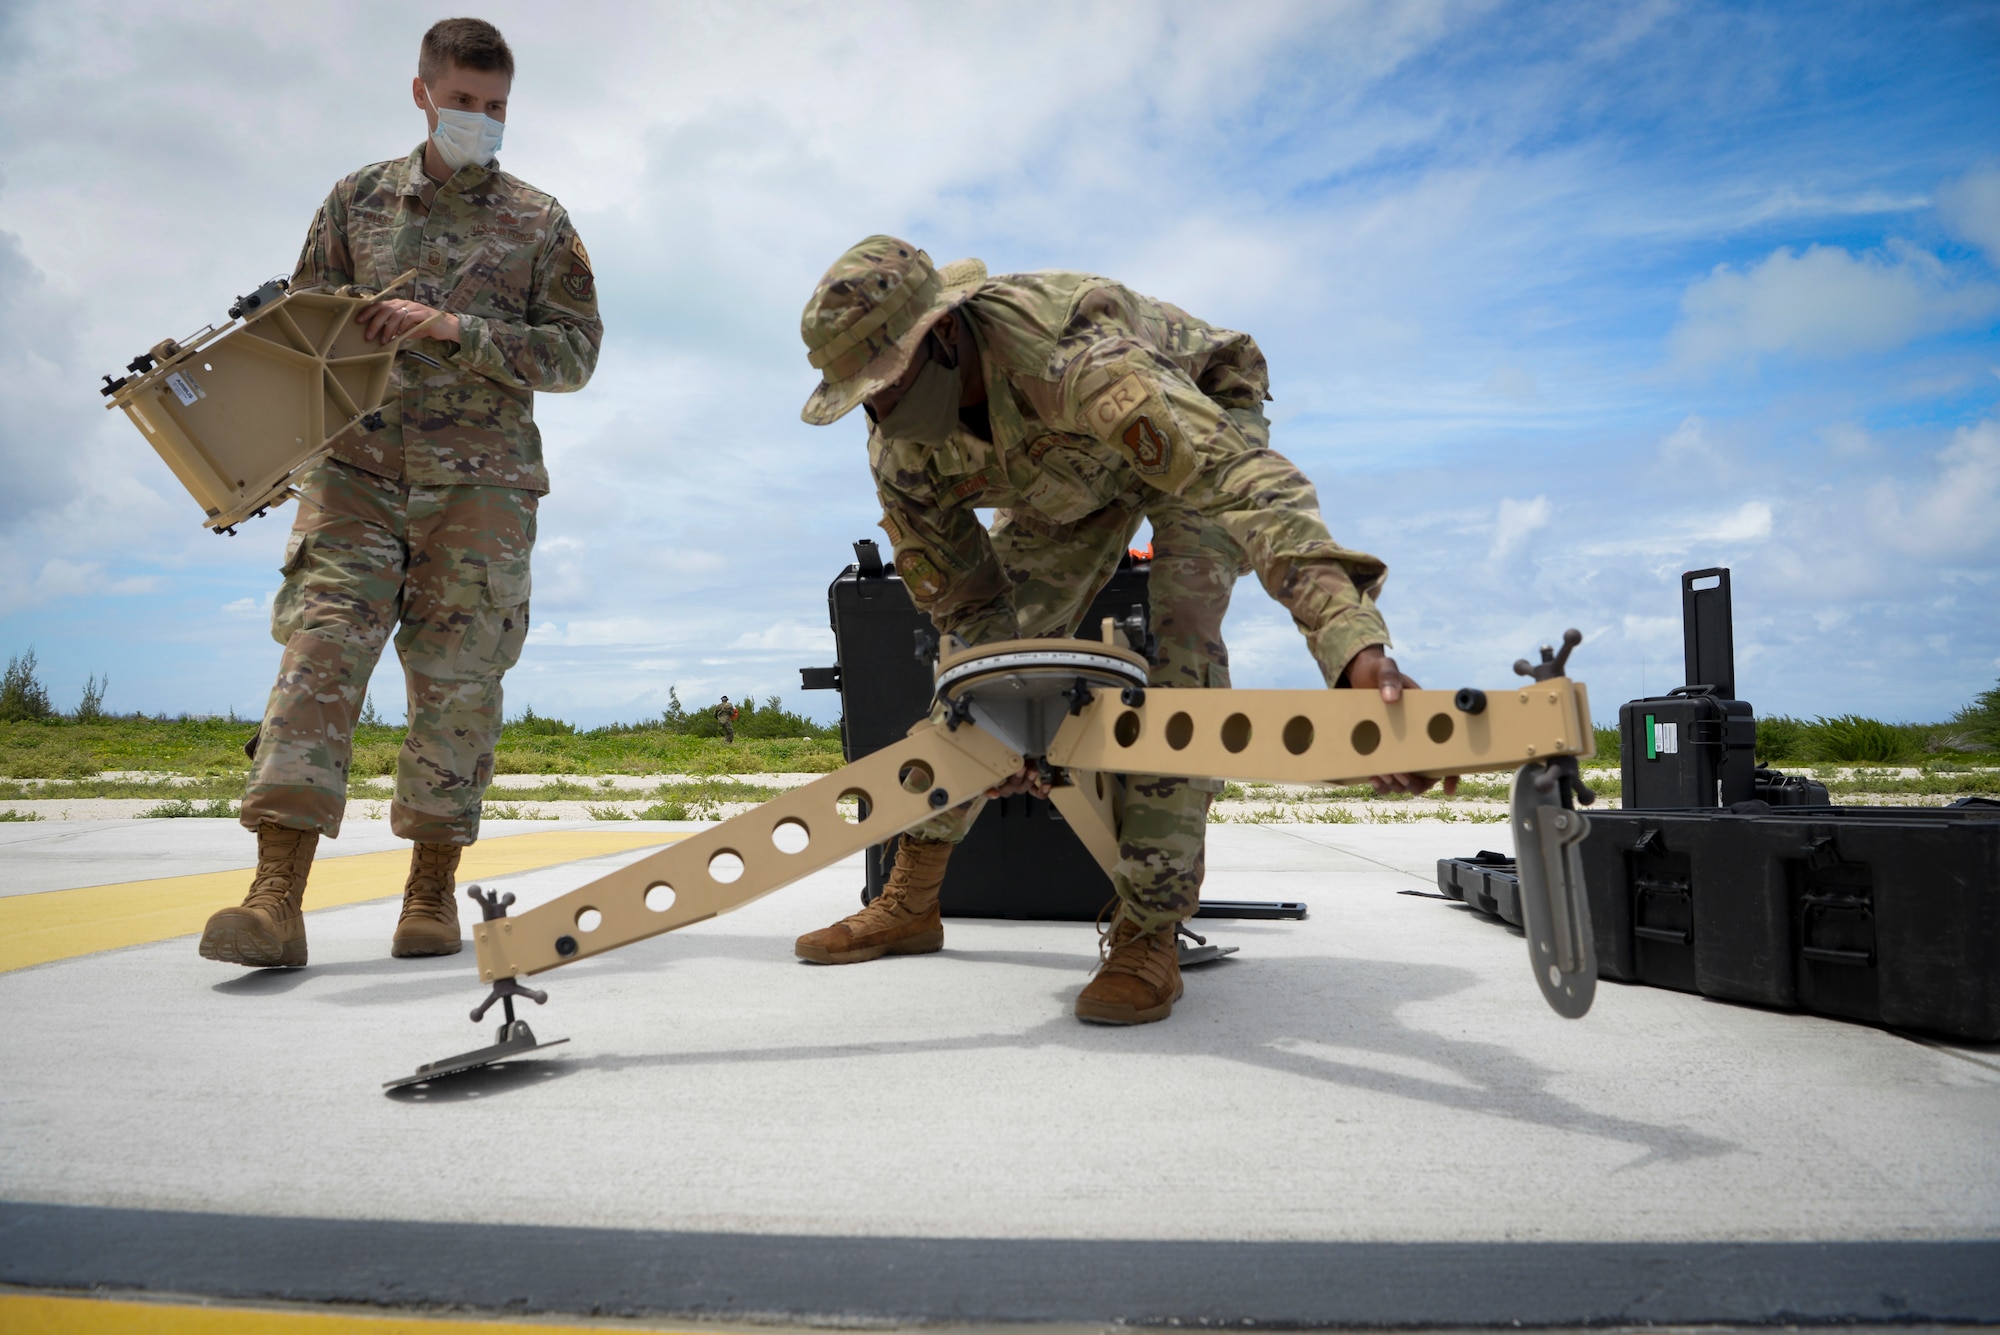 U.S. Air Force Master Sgt. Gilbert Kless, left, and Airman 1st Class Justin Brown, center, assigned to the 644th Combat Communications Squadron, set up a communication fly away kit during a field training exercise on Wake Island, Western Pacific, April 2, 2021.